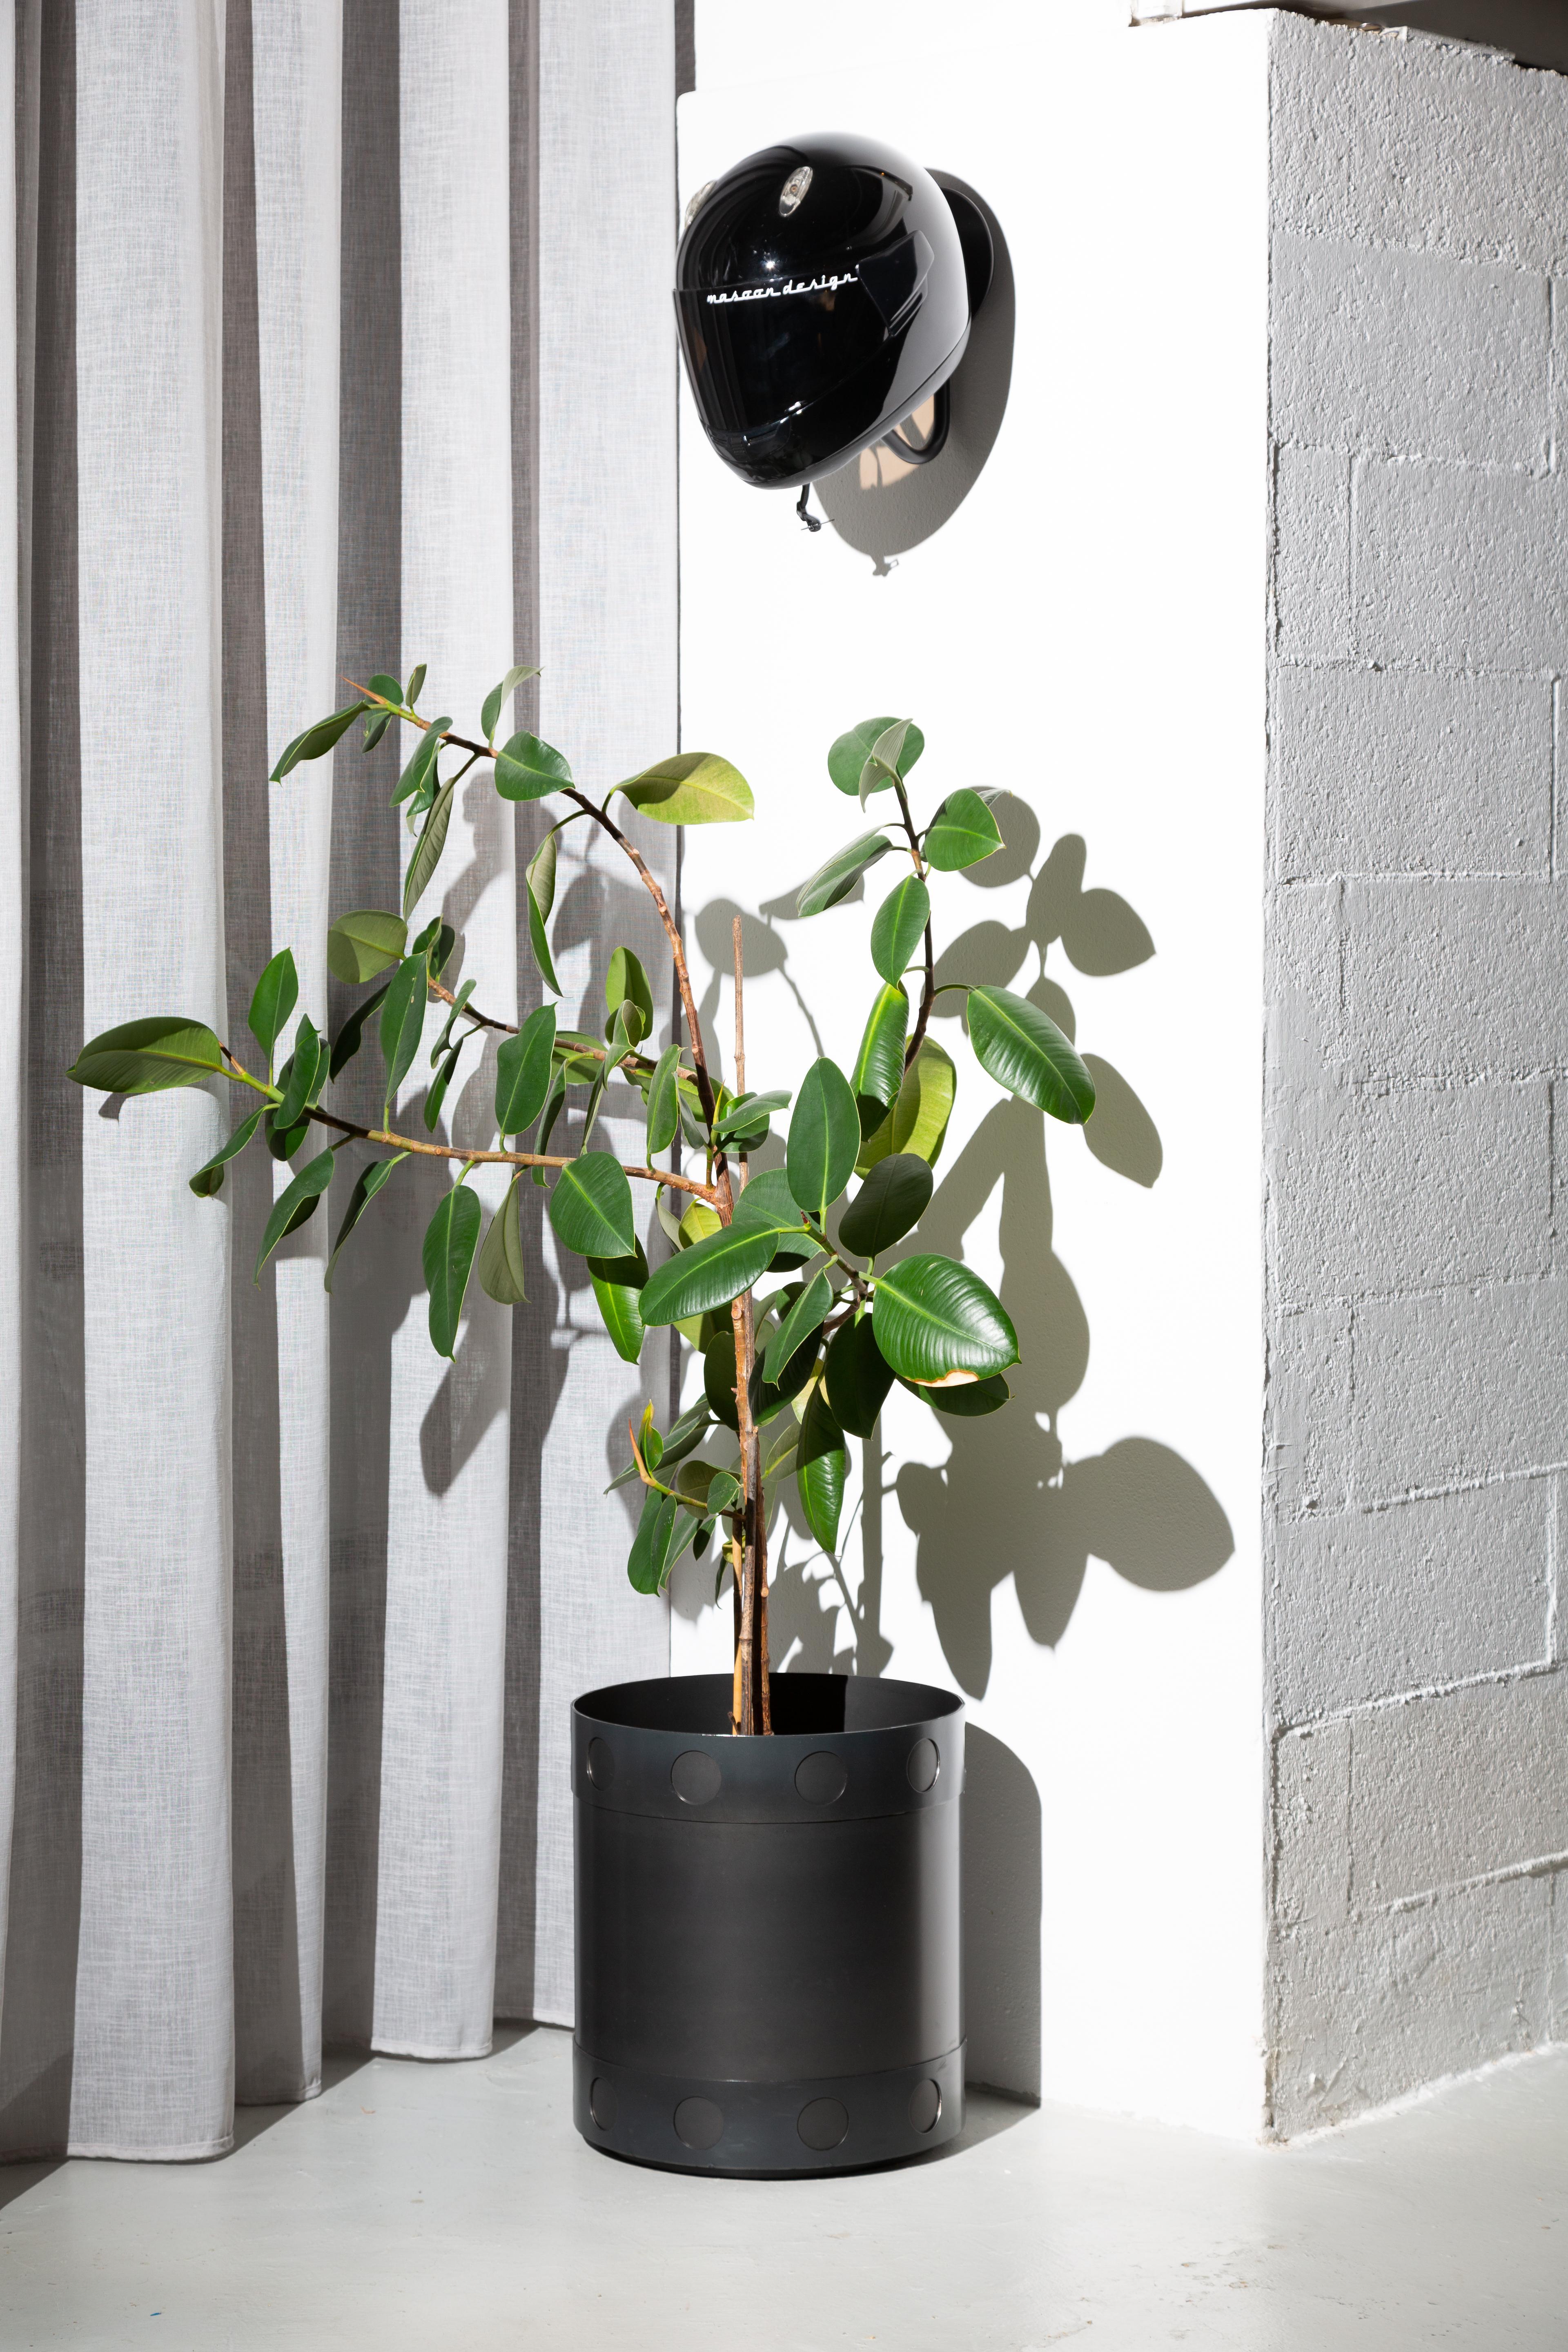 This planter/vase cover is part of Spinzi's Meccano collection, and is suitable for both indoor and outdoor use. Time will enrich the natural patina present on the metal, highlighting the industrial inspiration - better, derivation - of the piece,